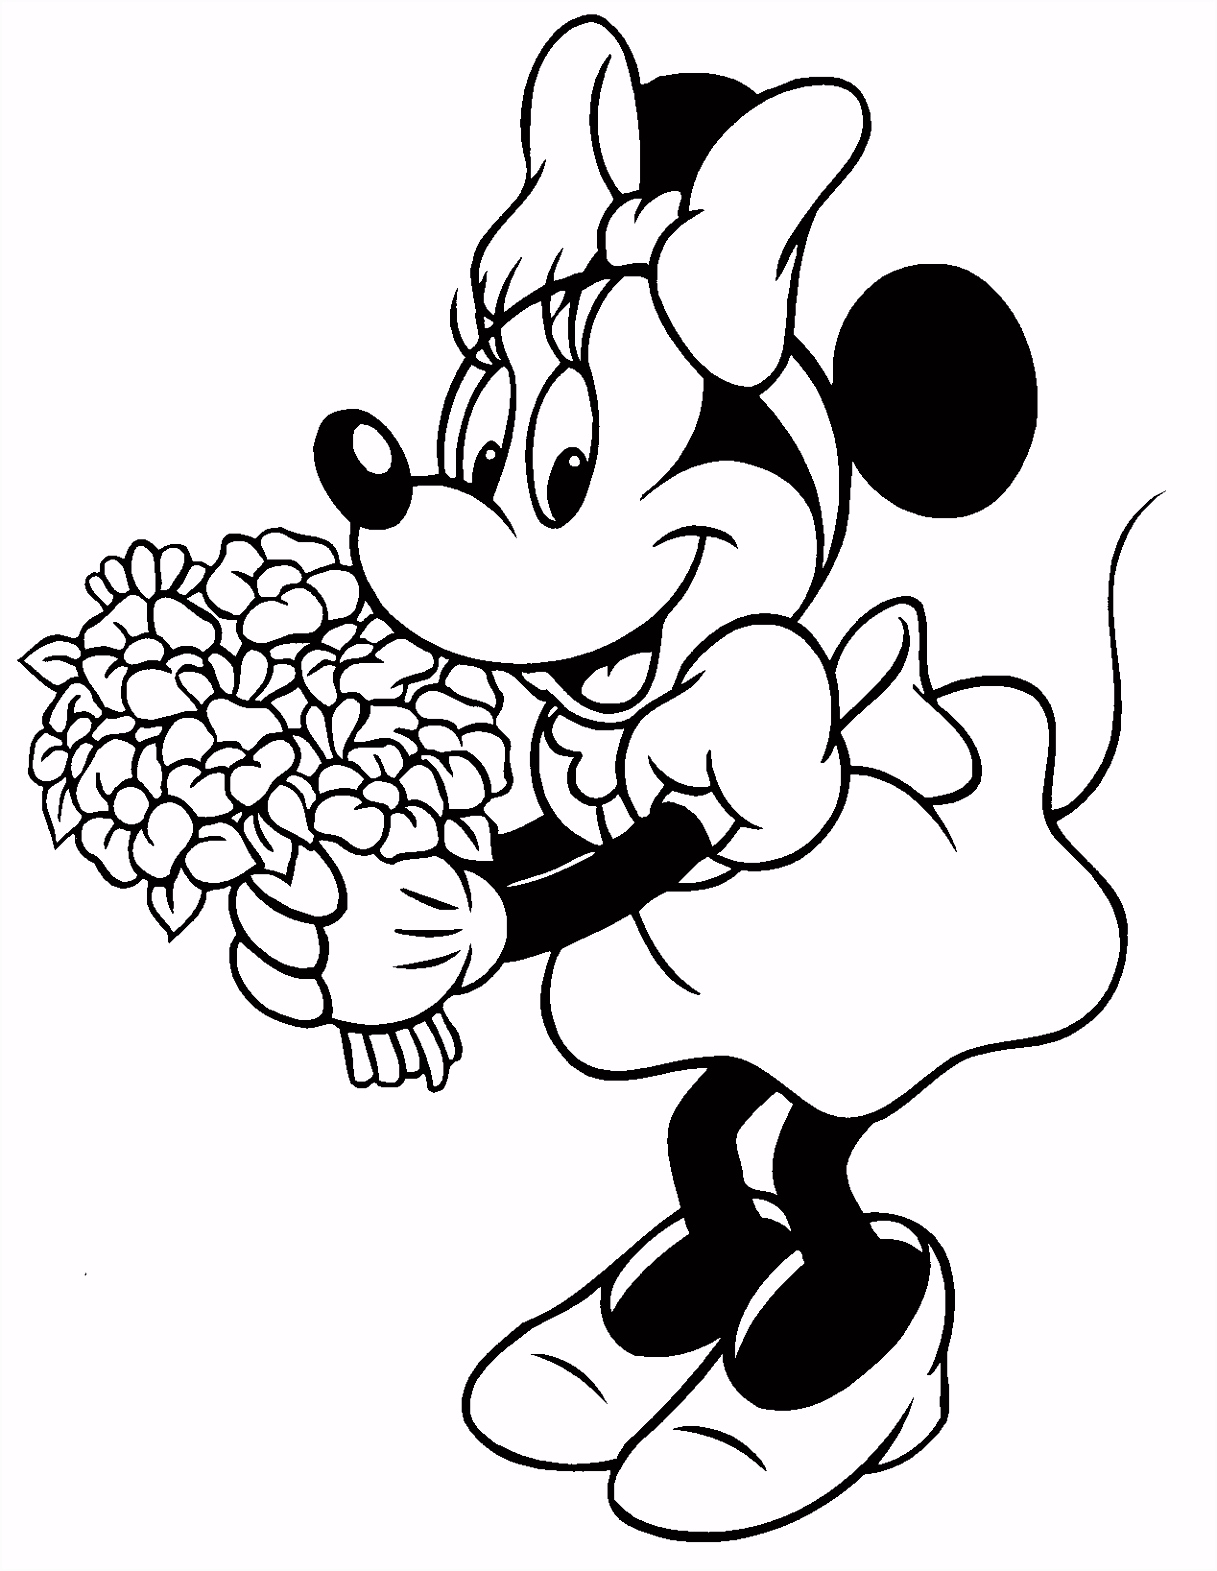 Mickey Minnie Mouse Black And White Encode clipart to Base64